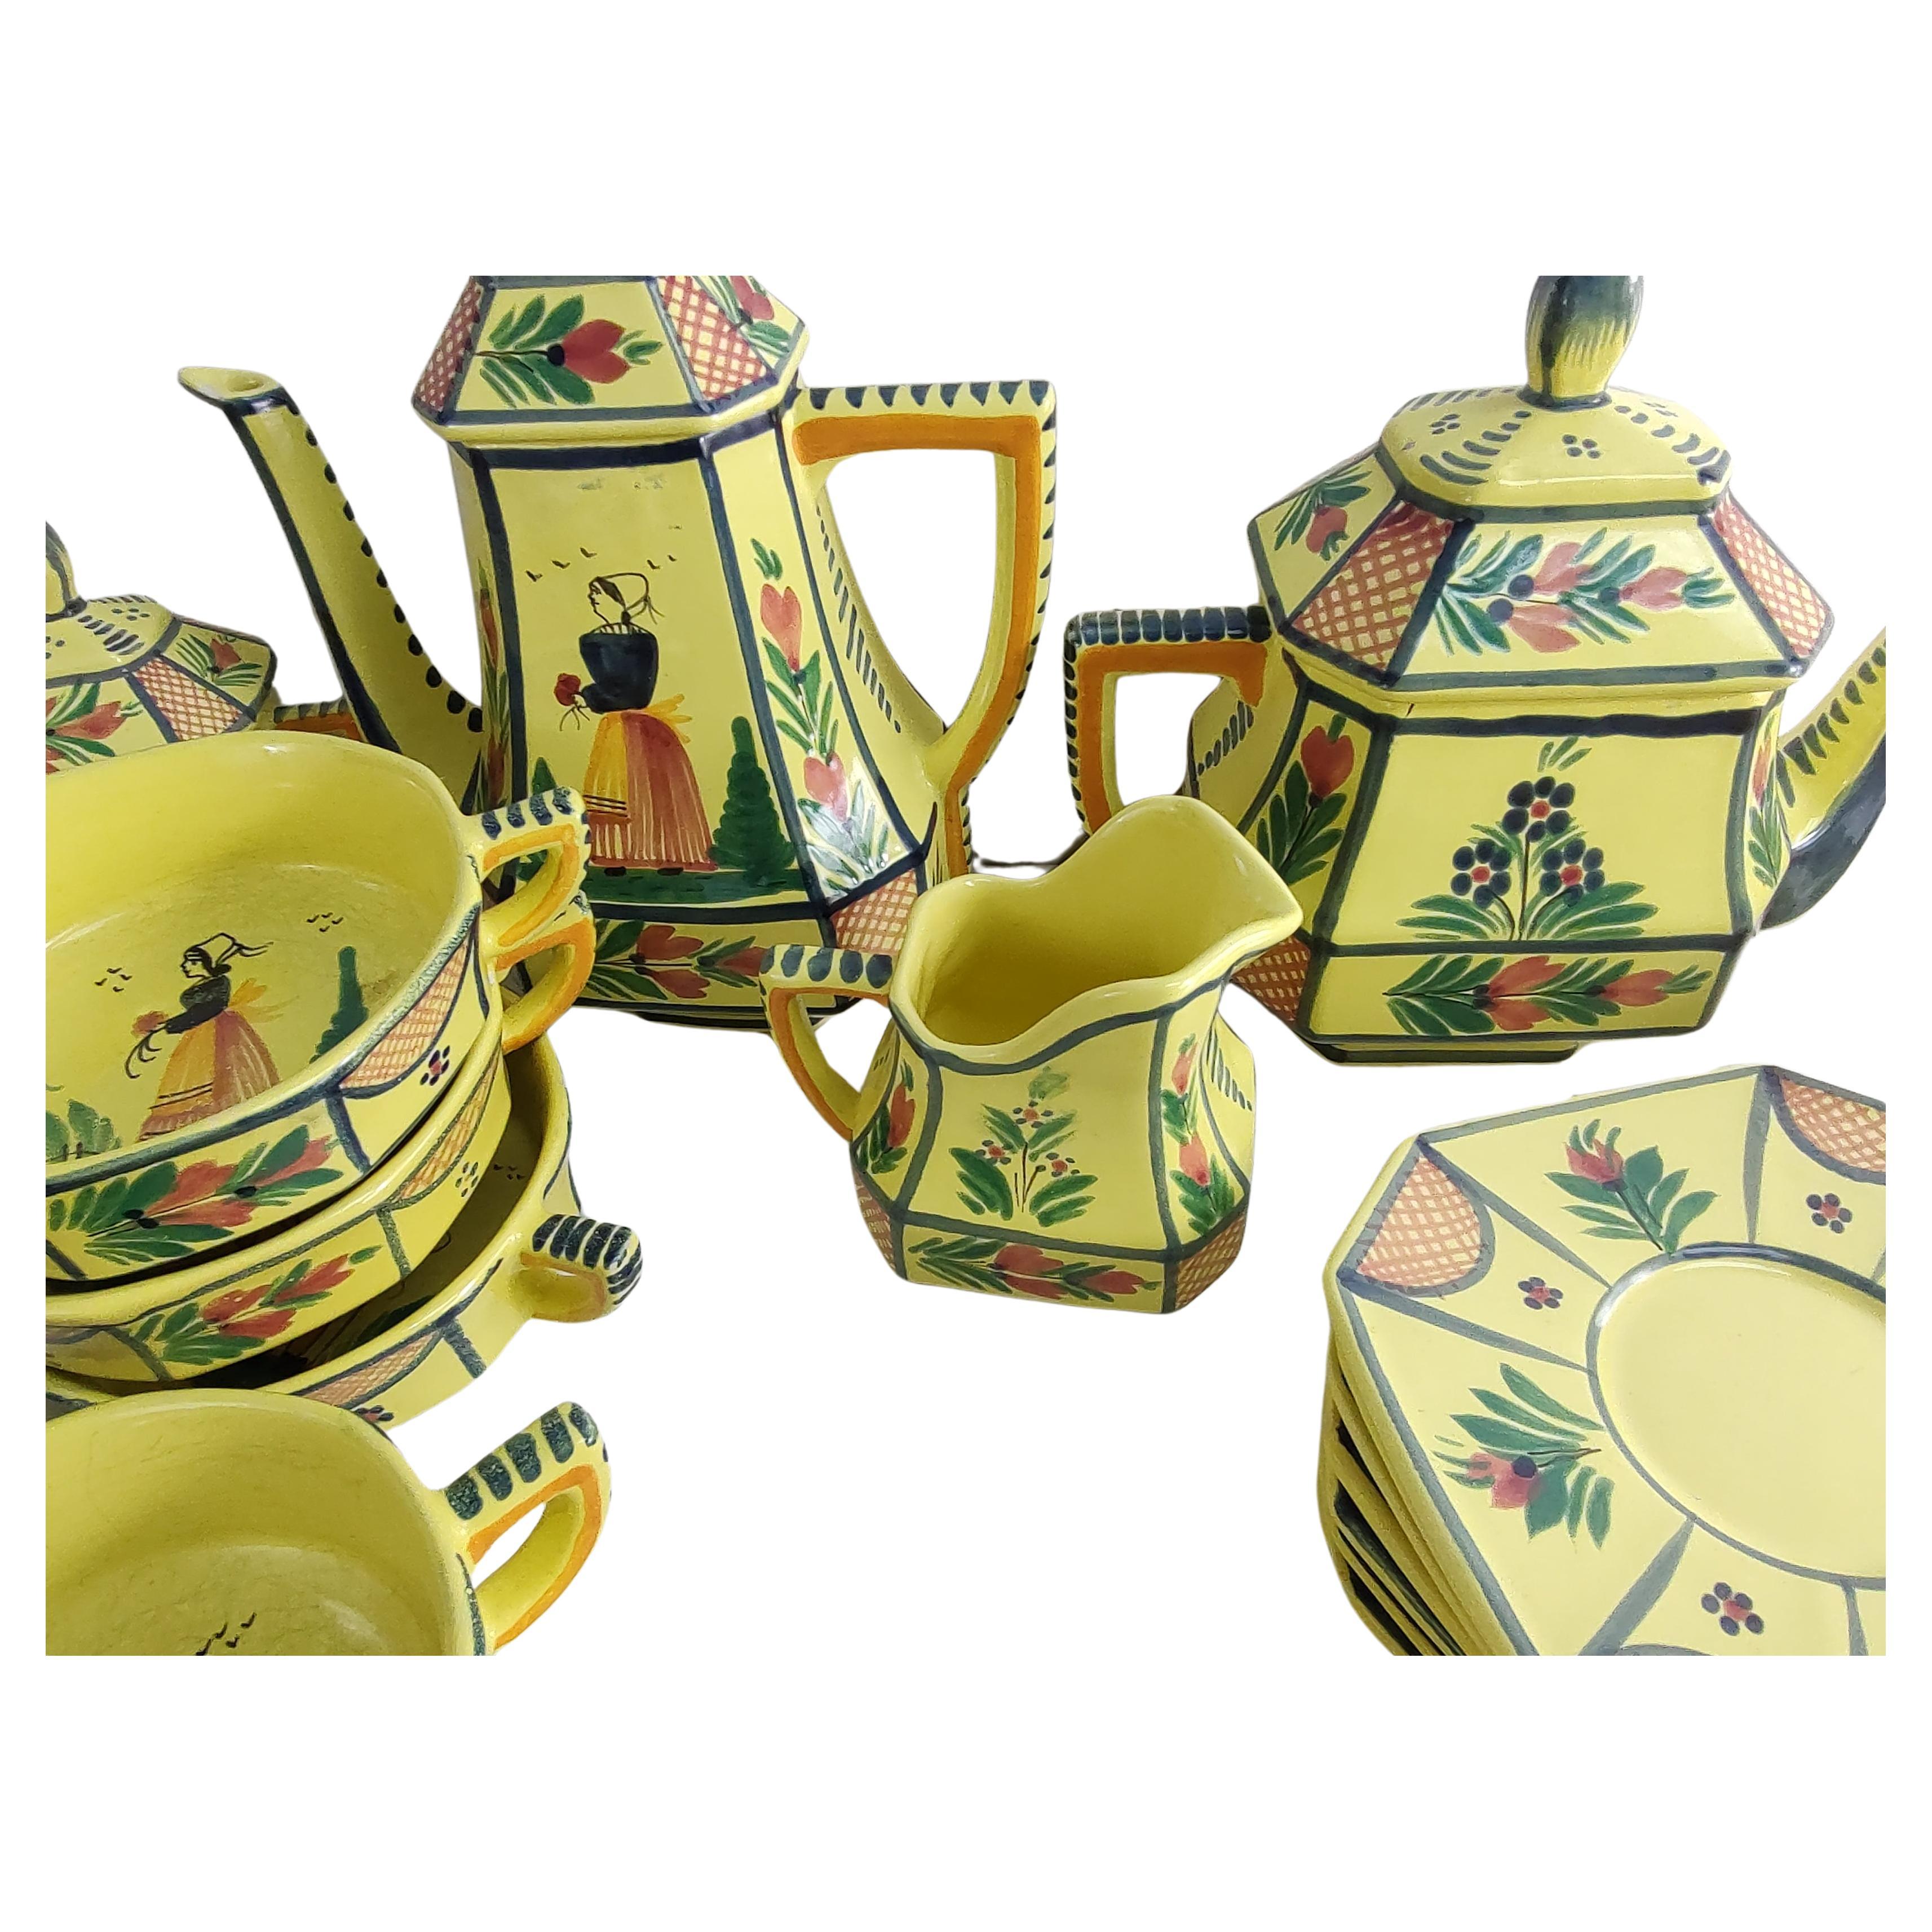 Fabulous dinner set of 50 pieces by the Henriot Quimper co. Their beautiful yellow color with the traditional peasant man ,& woman. Handmade & hand painted set is a classic. Set consists of 7 10